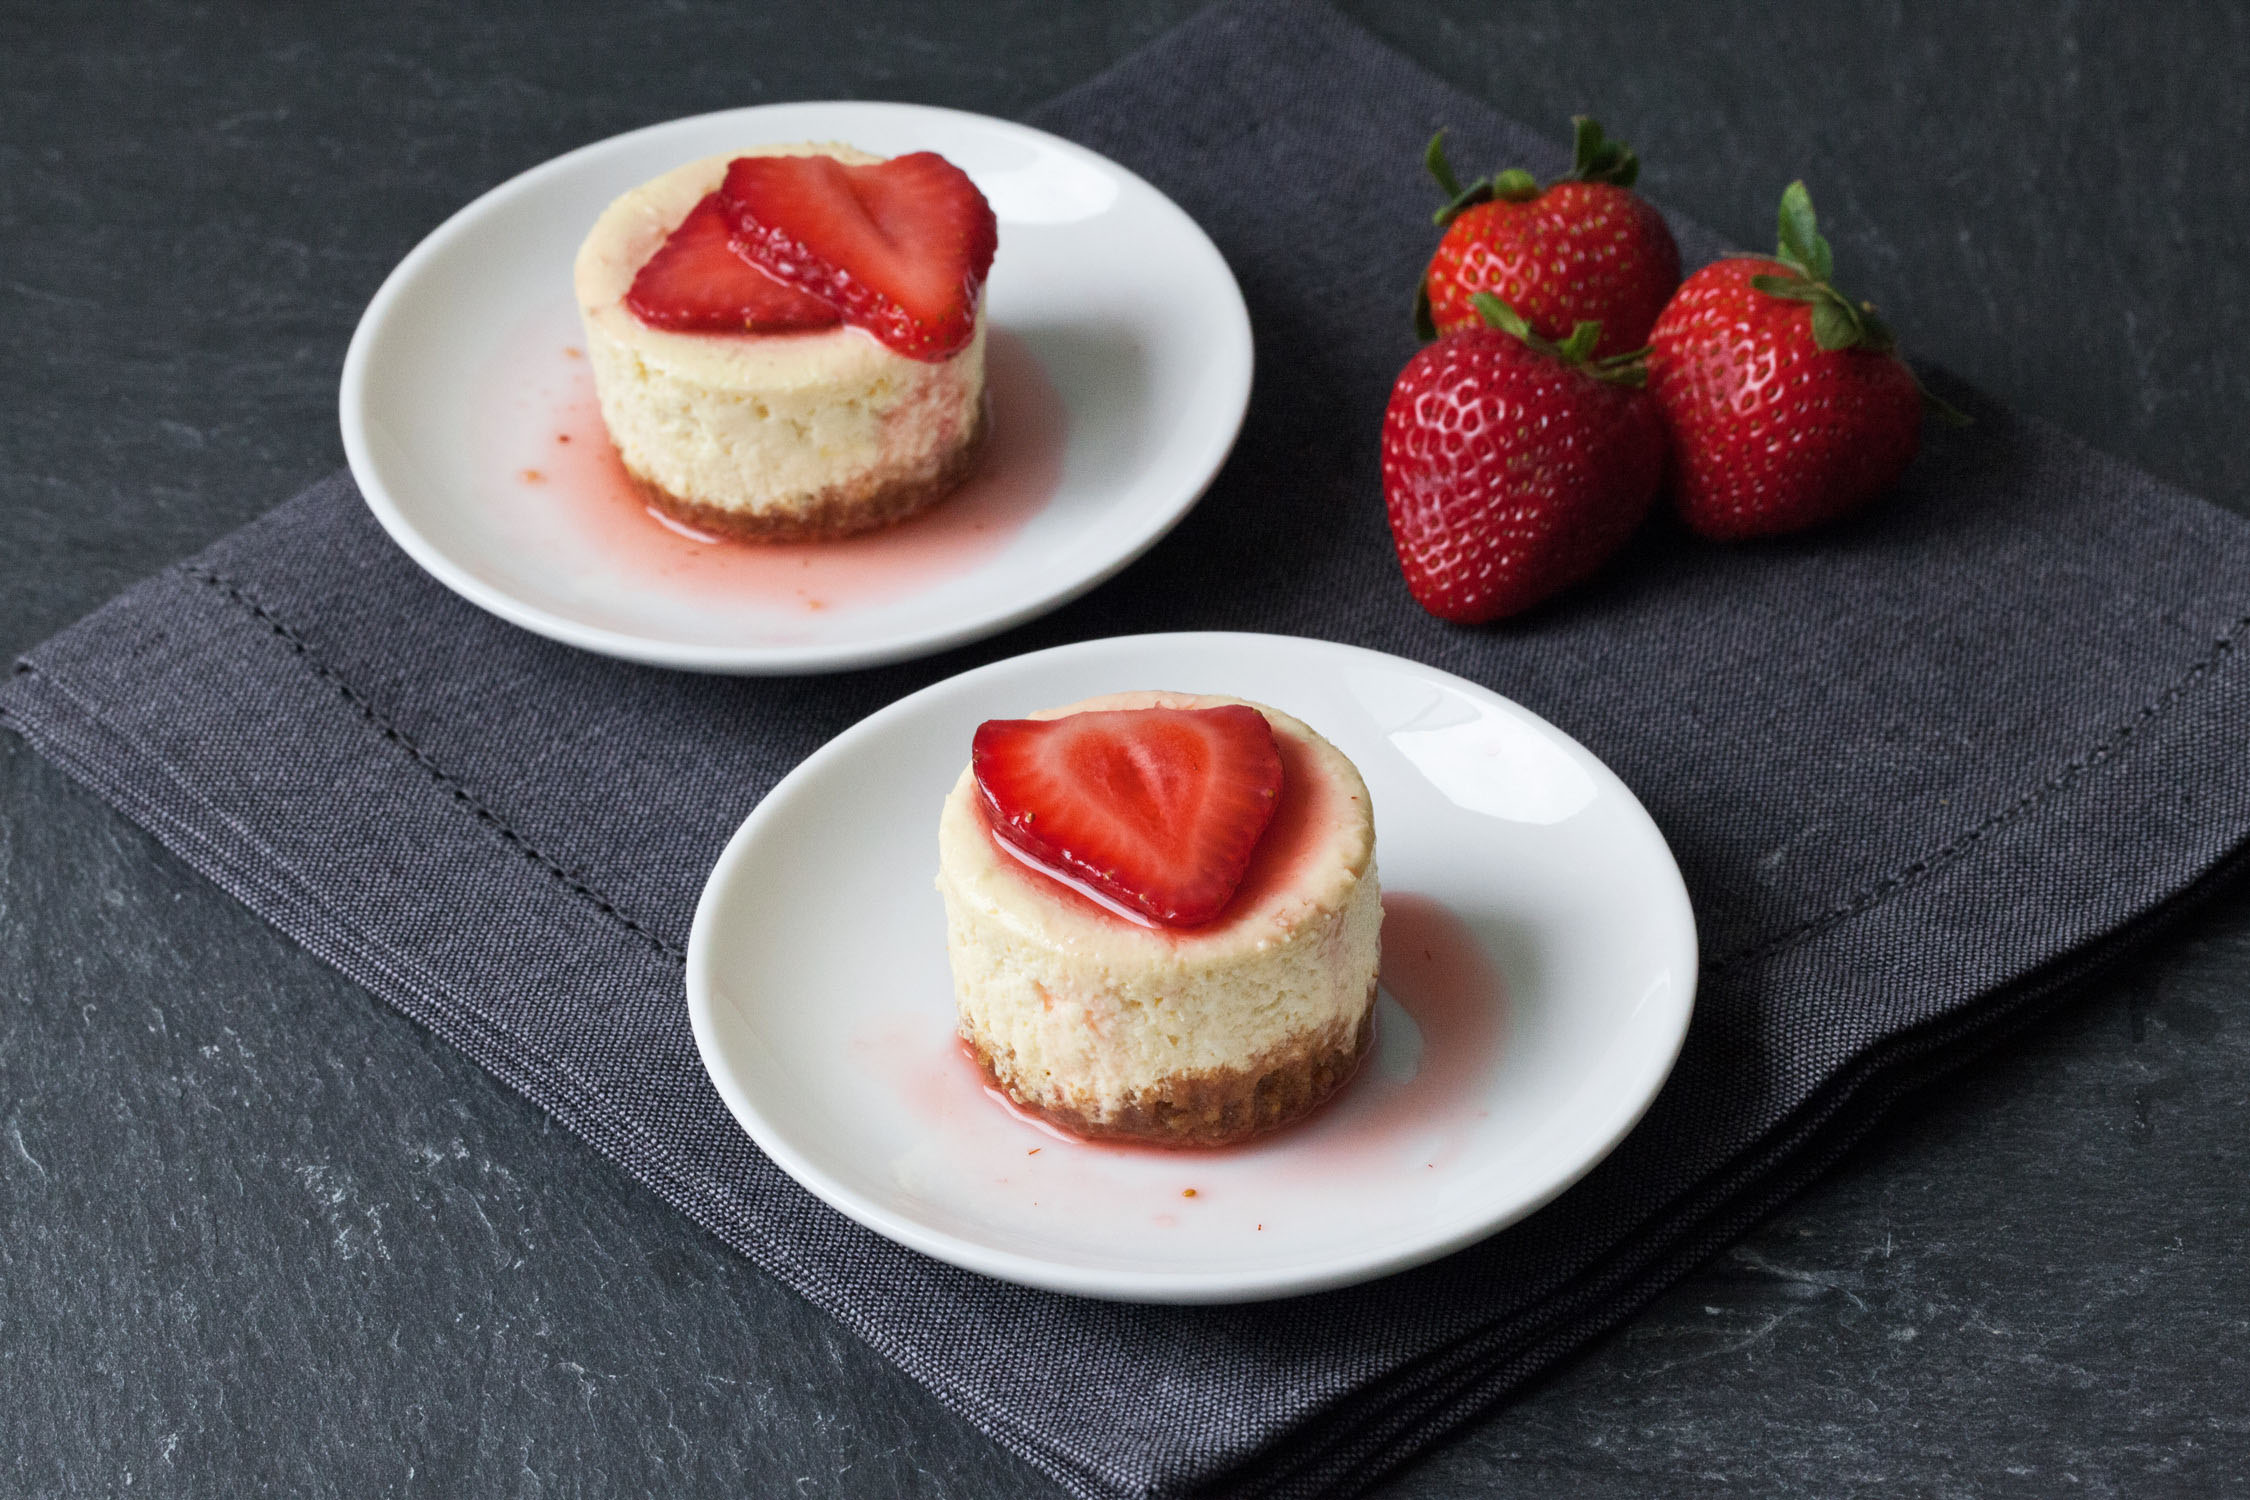 These mini cheesecakes aren't just adorable, baked in a muffin tin....